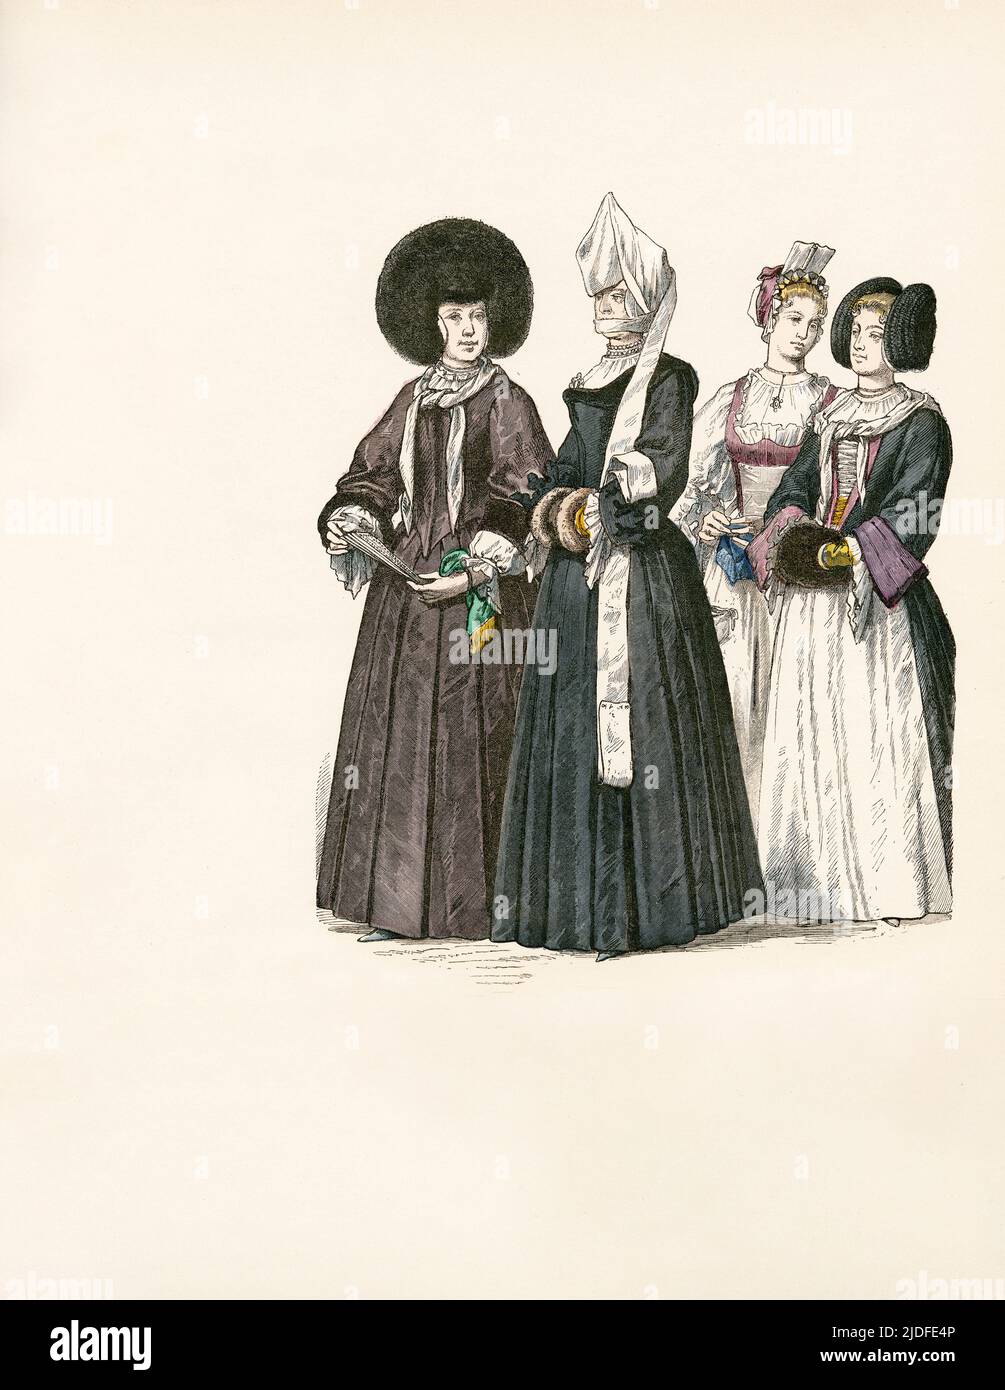 Women's Ceremonial Dress, Noblewoman in Mourning, Girl's Domestic Attire, Girl with 'Rose Cap', Switzerland (city of Zurich), Early 18th Century, Illustration, The History of Costume, Braun & Schneider, Munich, Germany, 1861-1880 Stock Photo